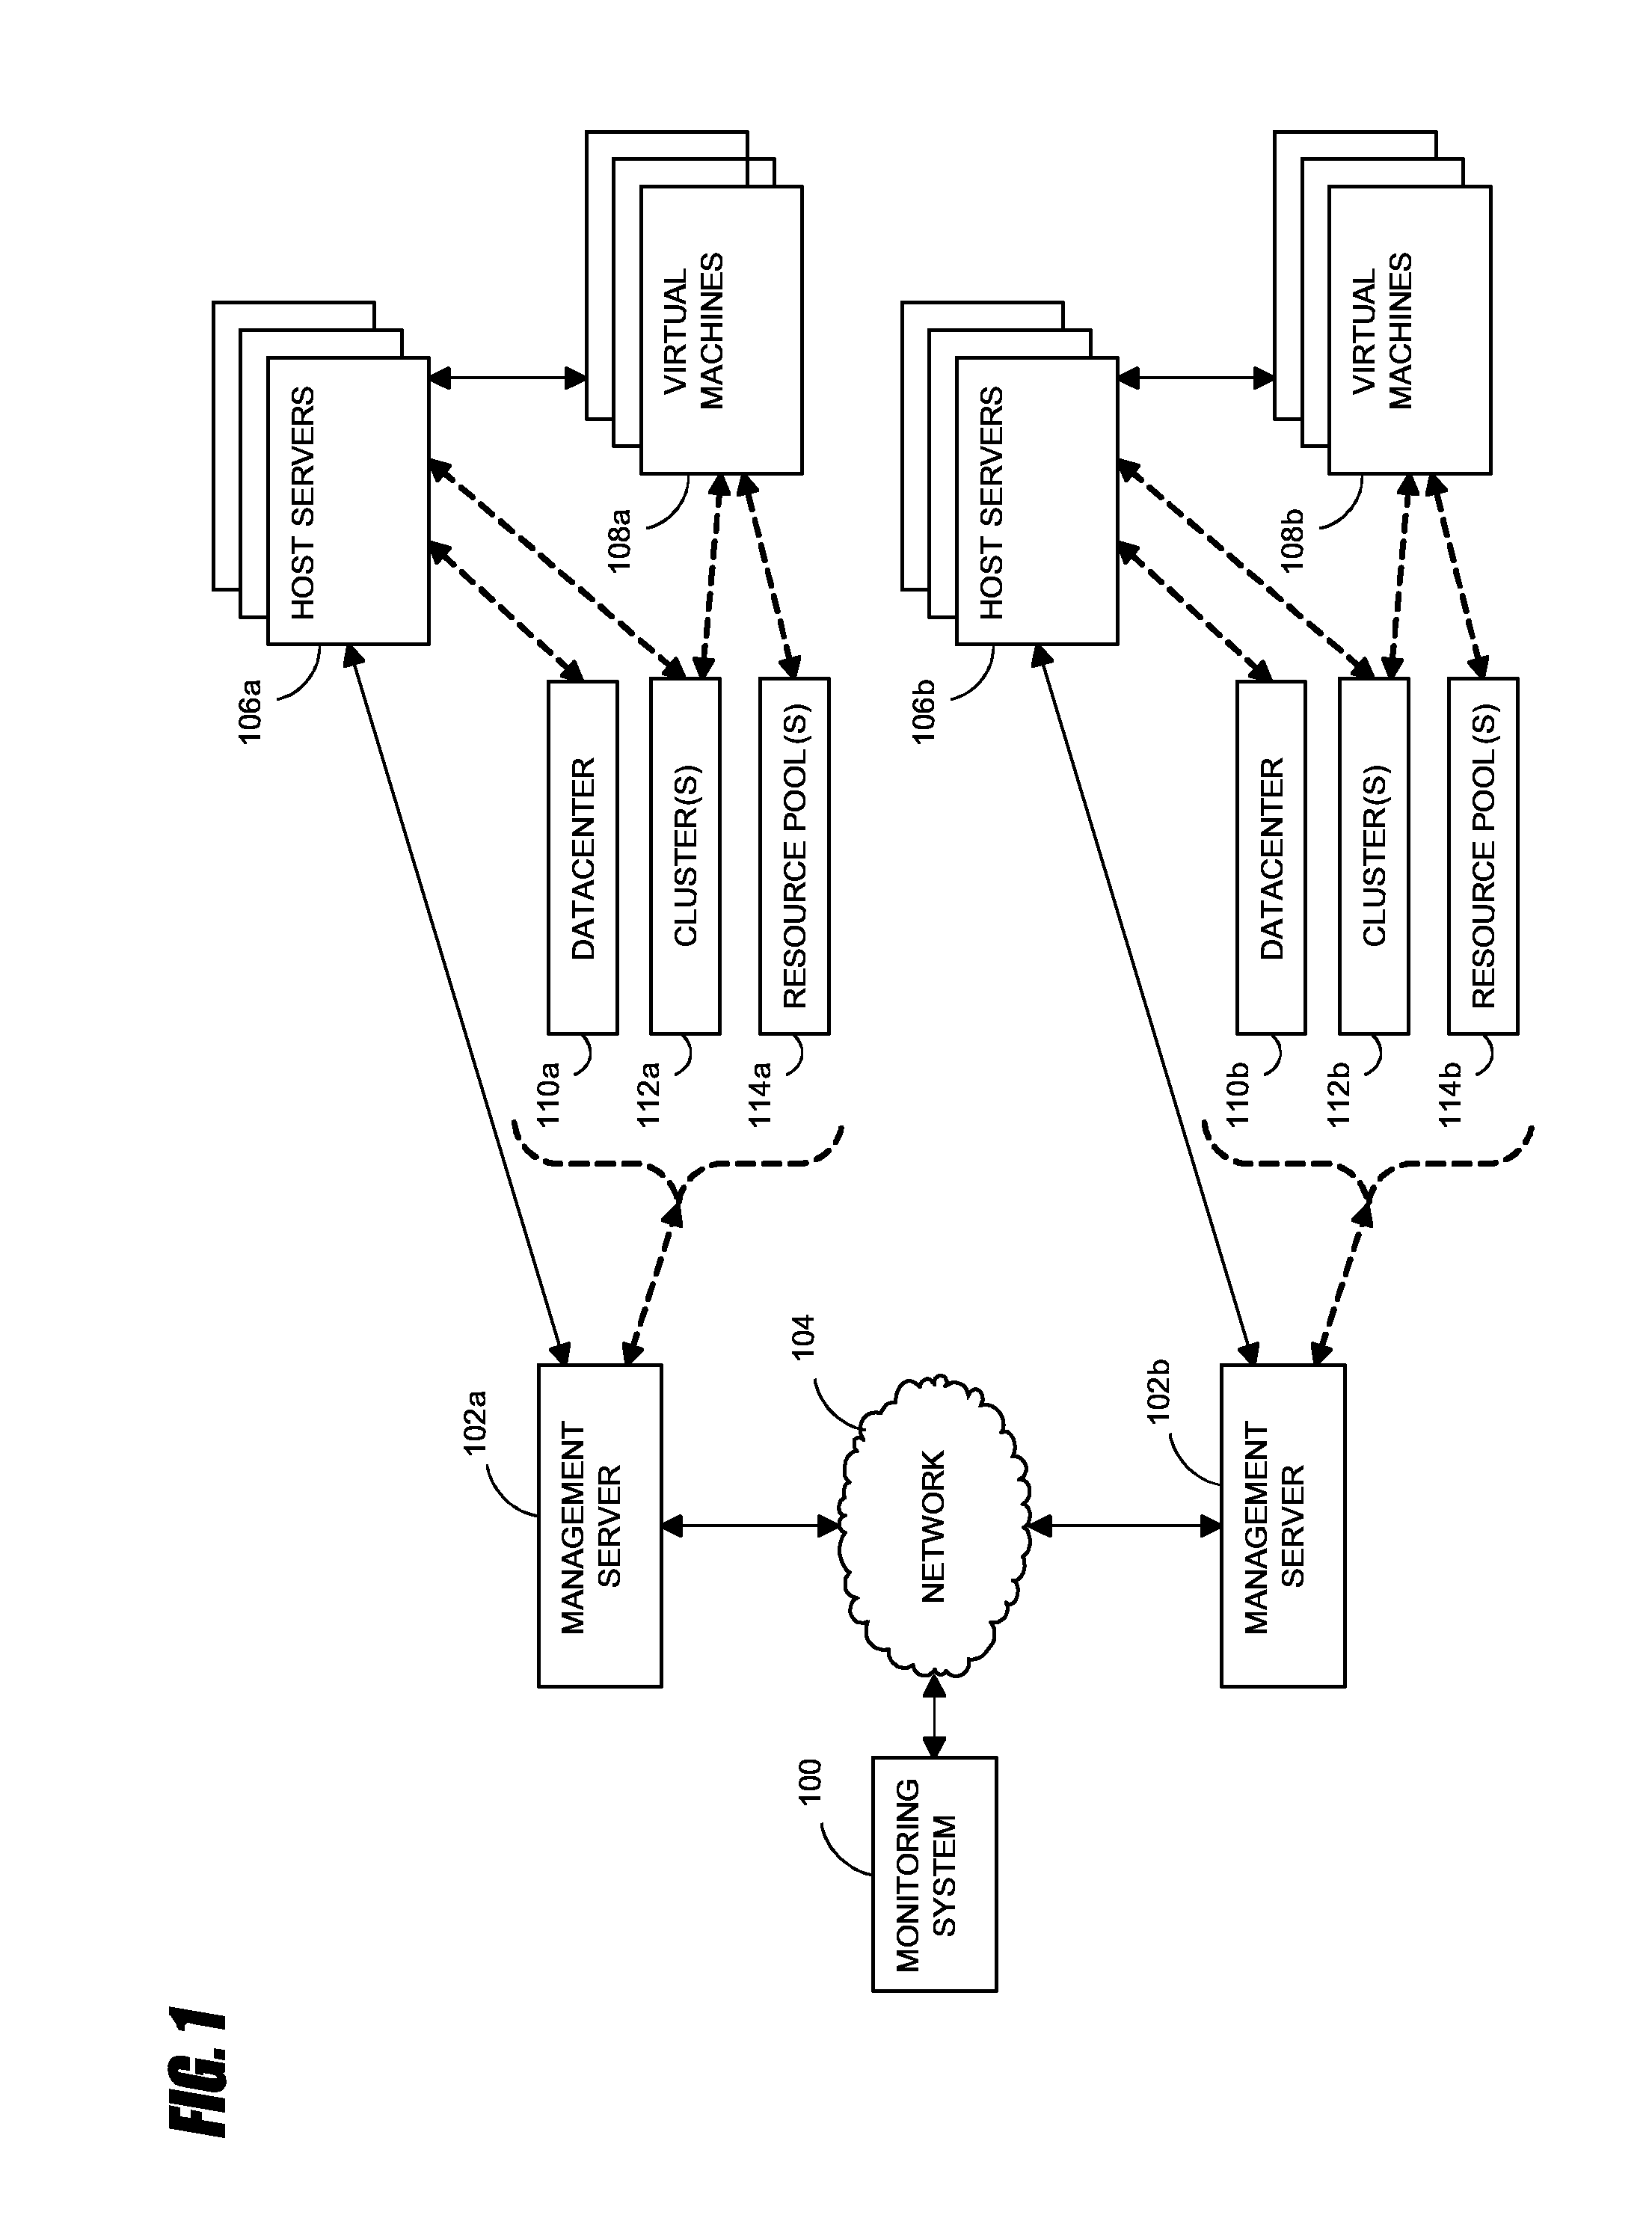 Systems and methods for analyzing performance of virtual environments